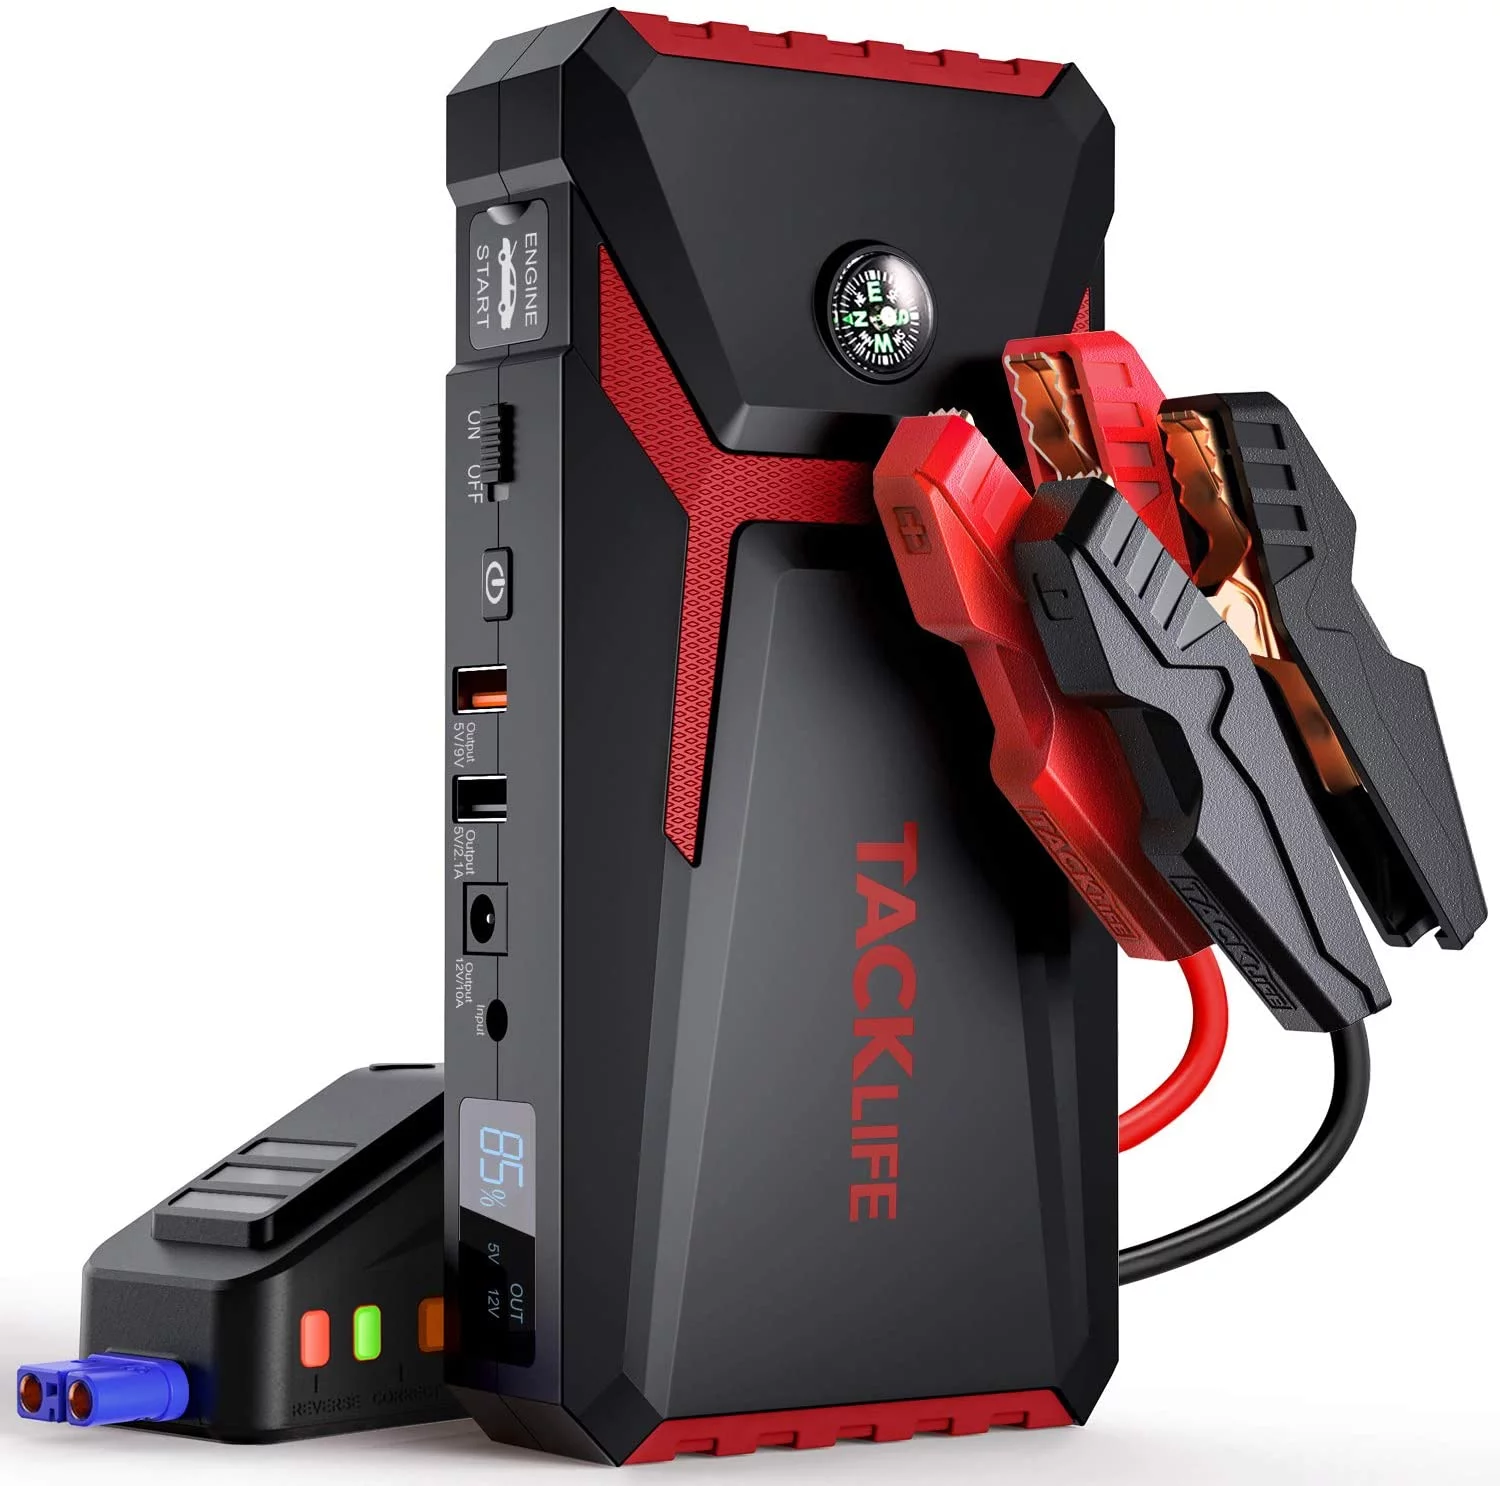 Tacklife 800A Peak 18000mAh Car Jump Starter Up to 7.0L Gas, 5.5L Diesel Engine, 12V Auto Battery Booster T8 Red